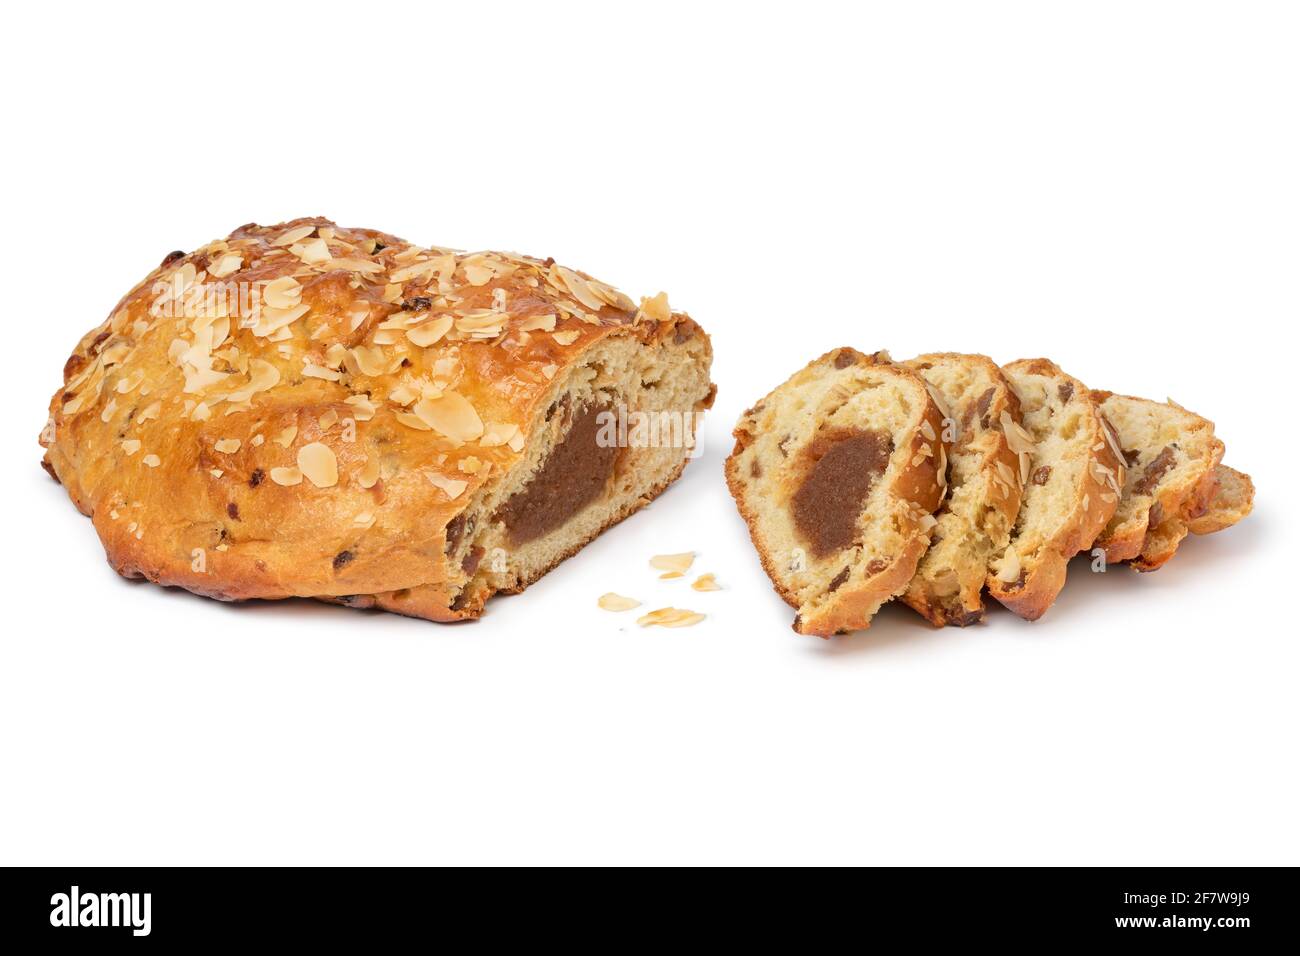 Sliced stuffed bread Cut Out Stock Images & Pictures - Alamy